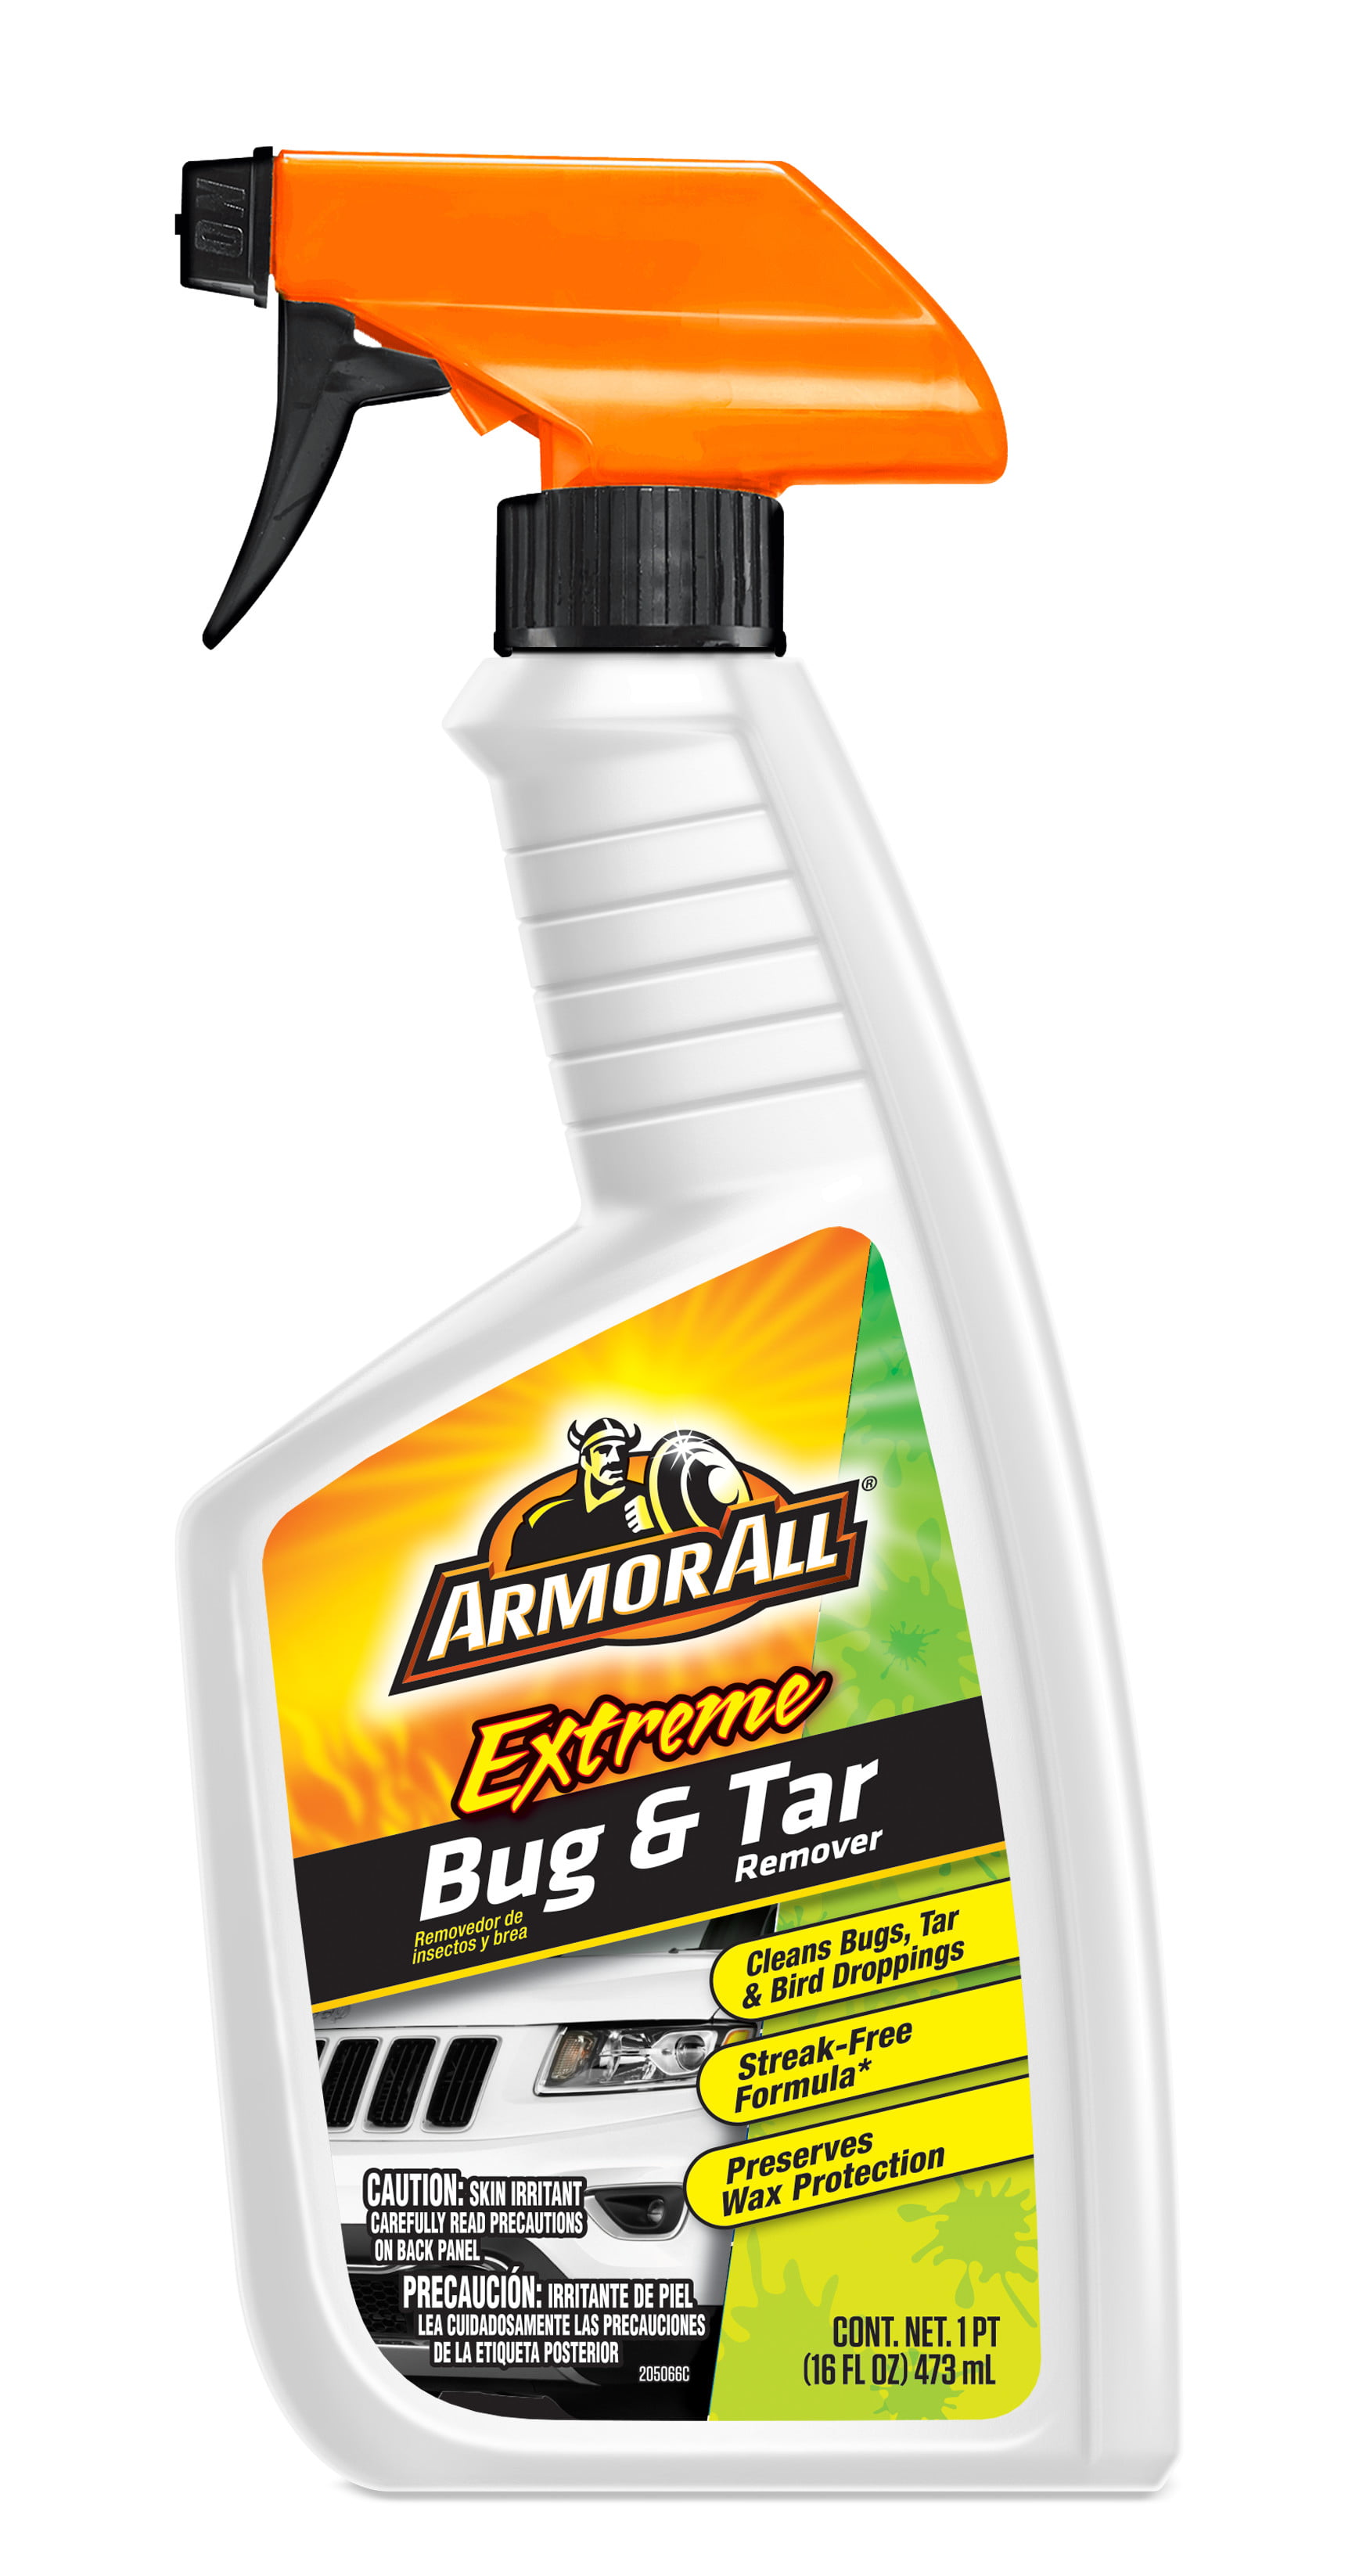 Top Tricks for Removing Bugs & Tar from Your Ride